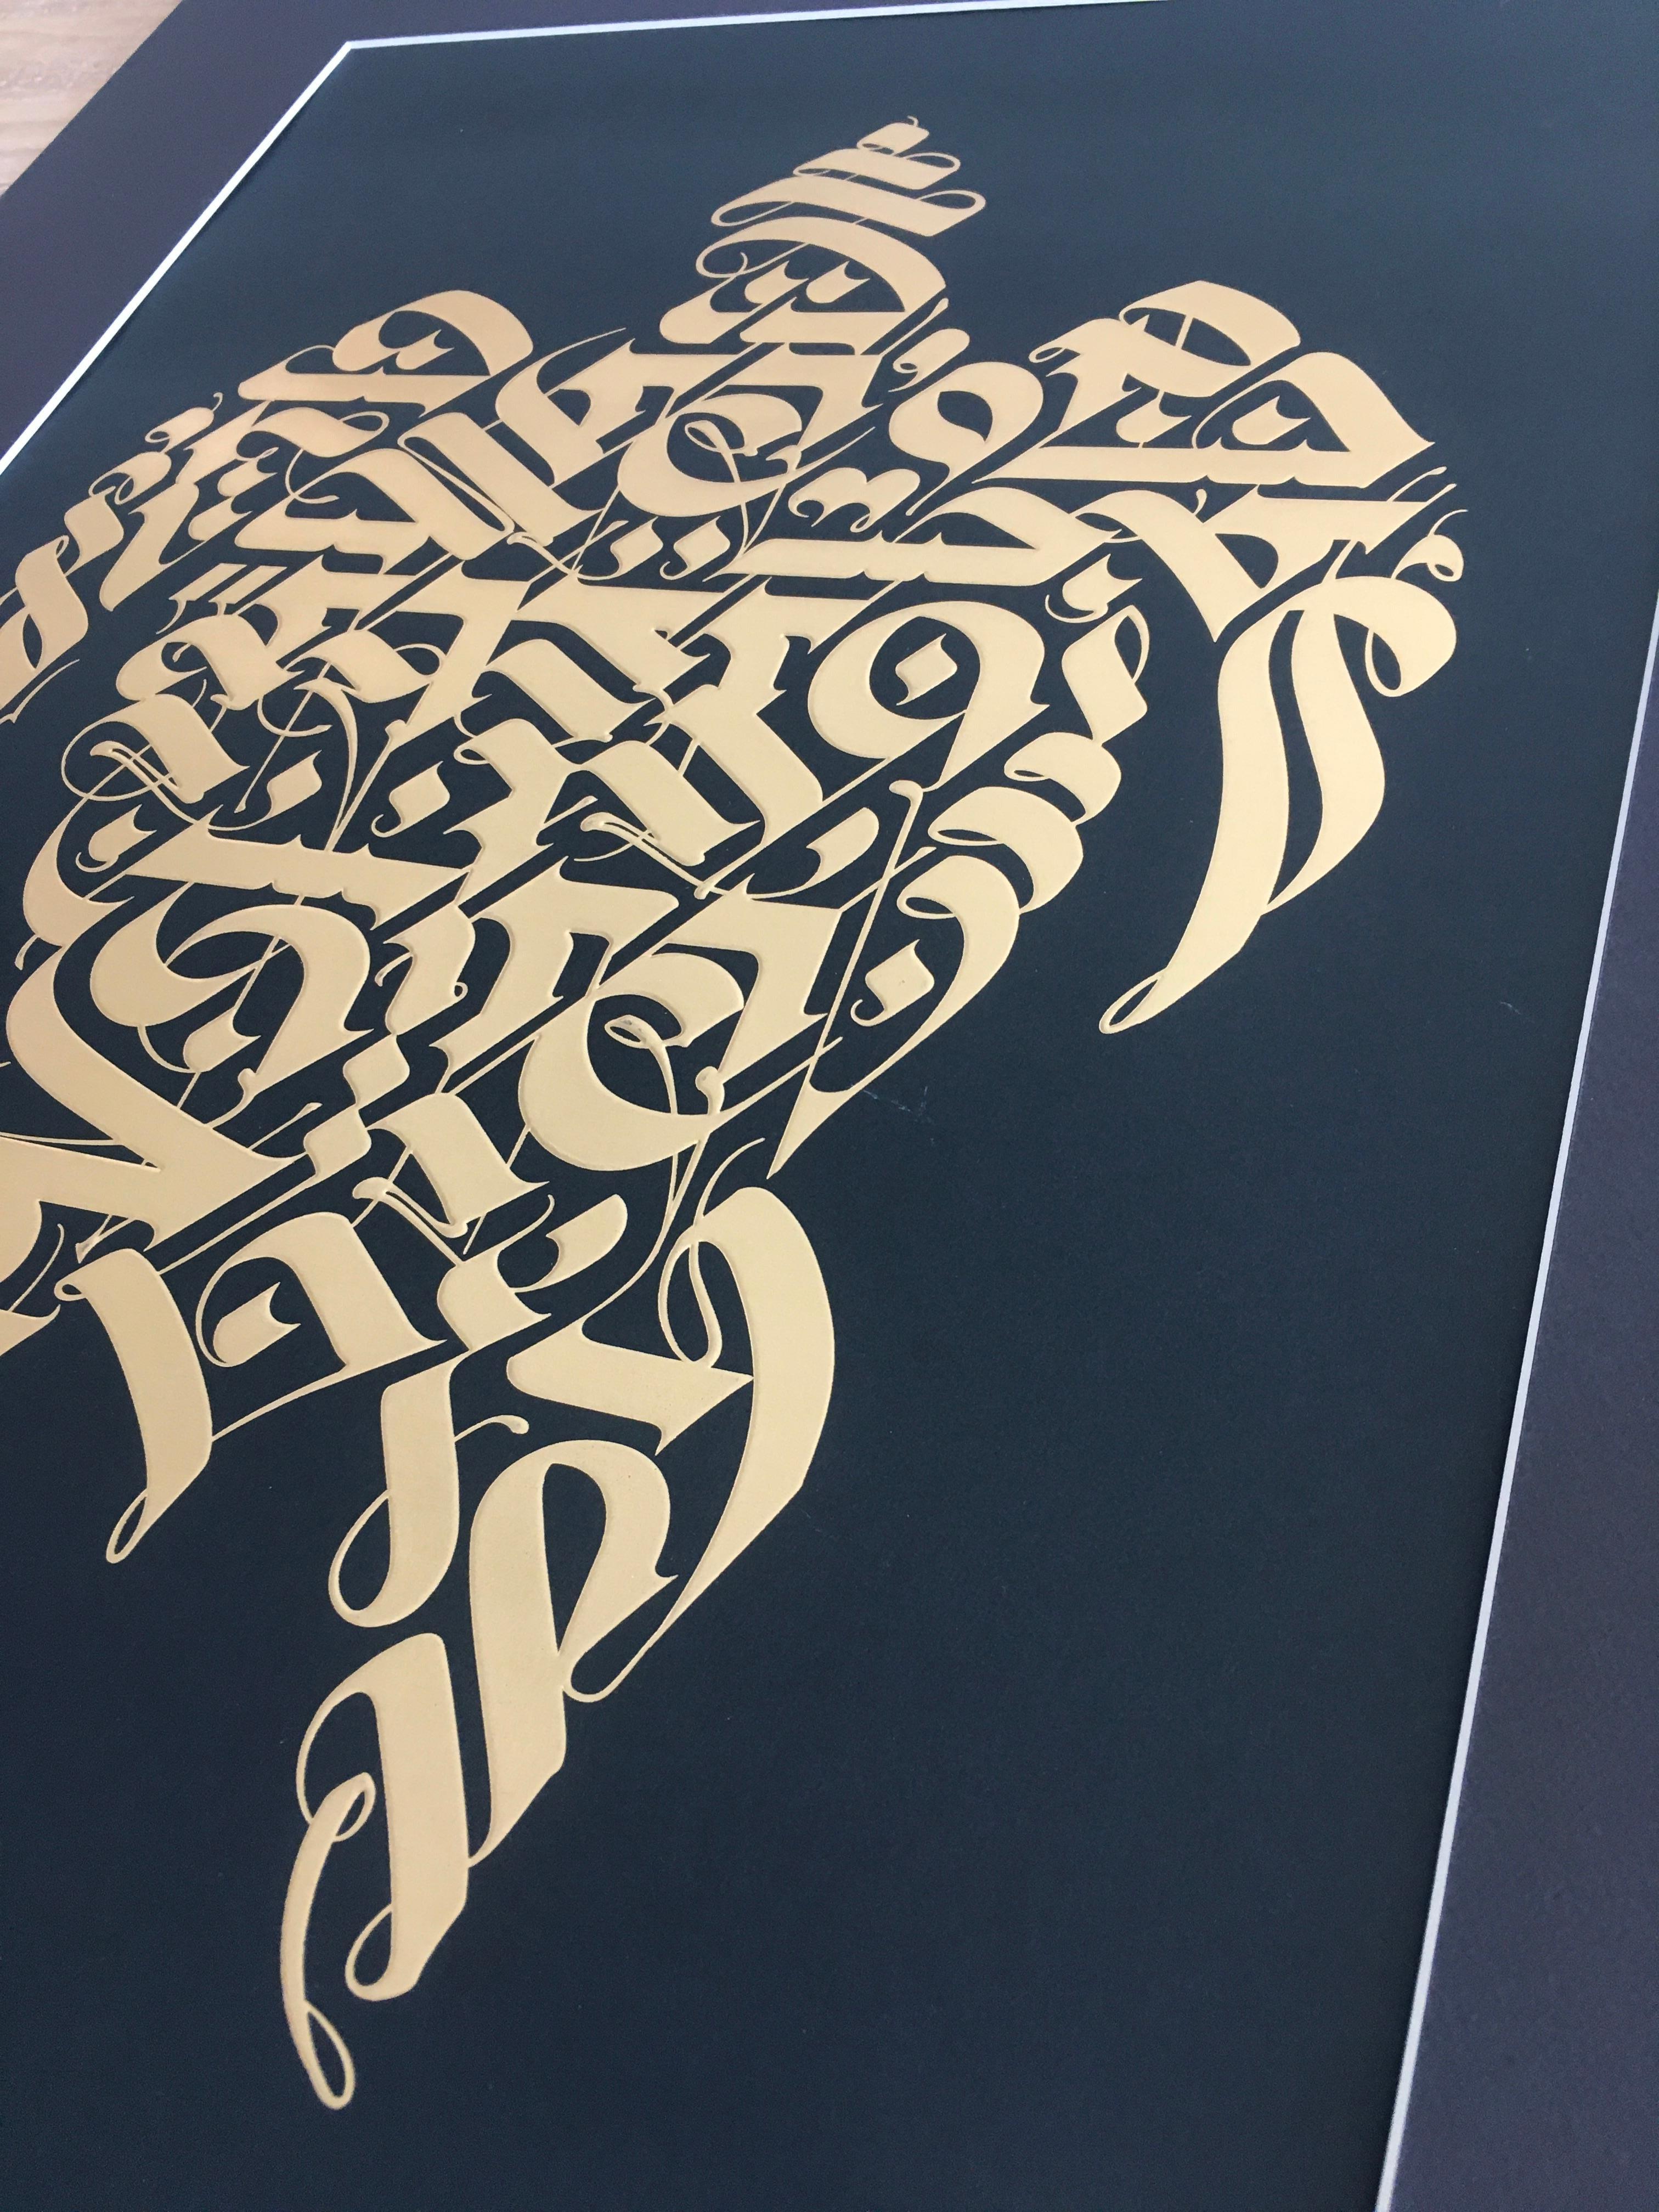 „Ahimsa Black“ by Cryptik 
Embossed Gold Foil Stamping on Black Cover Paper
Size 48.3 × 35.6 cm
Signed and numbered (6/60), in pencil along lower edge

Cryptik is a Los Angeles based artist who creates from a palette of wonder, where all science,